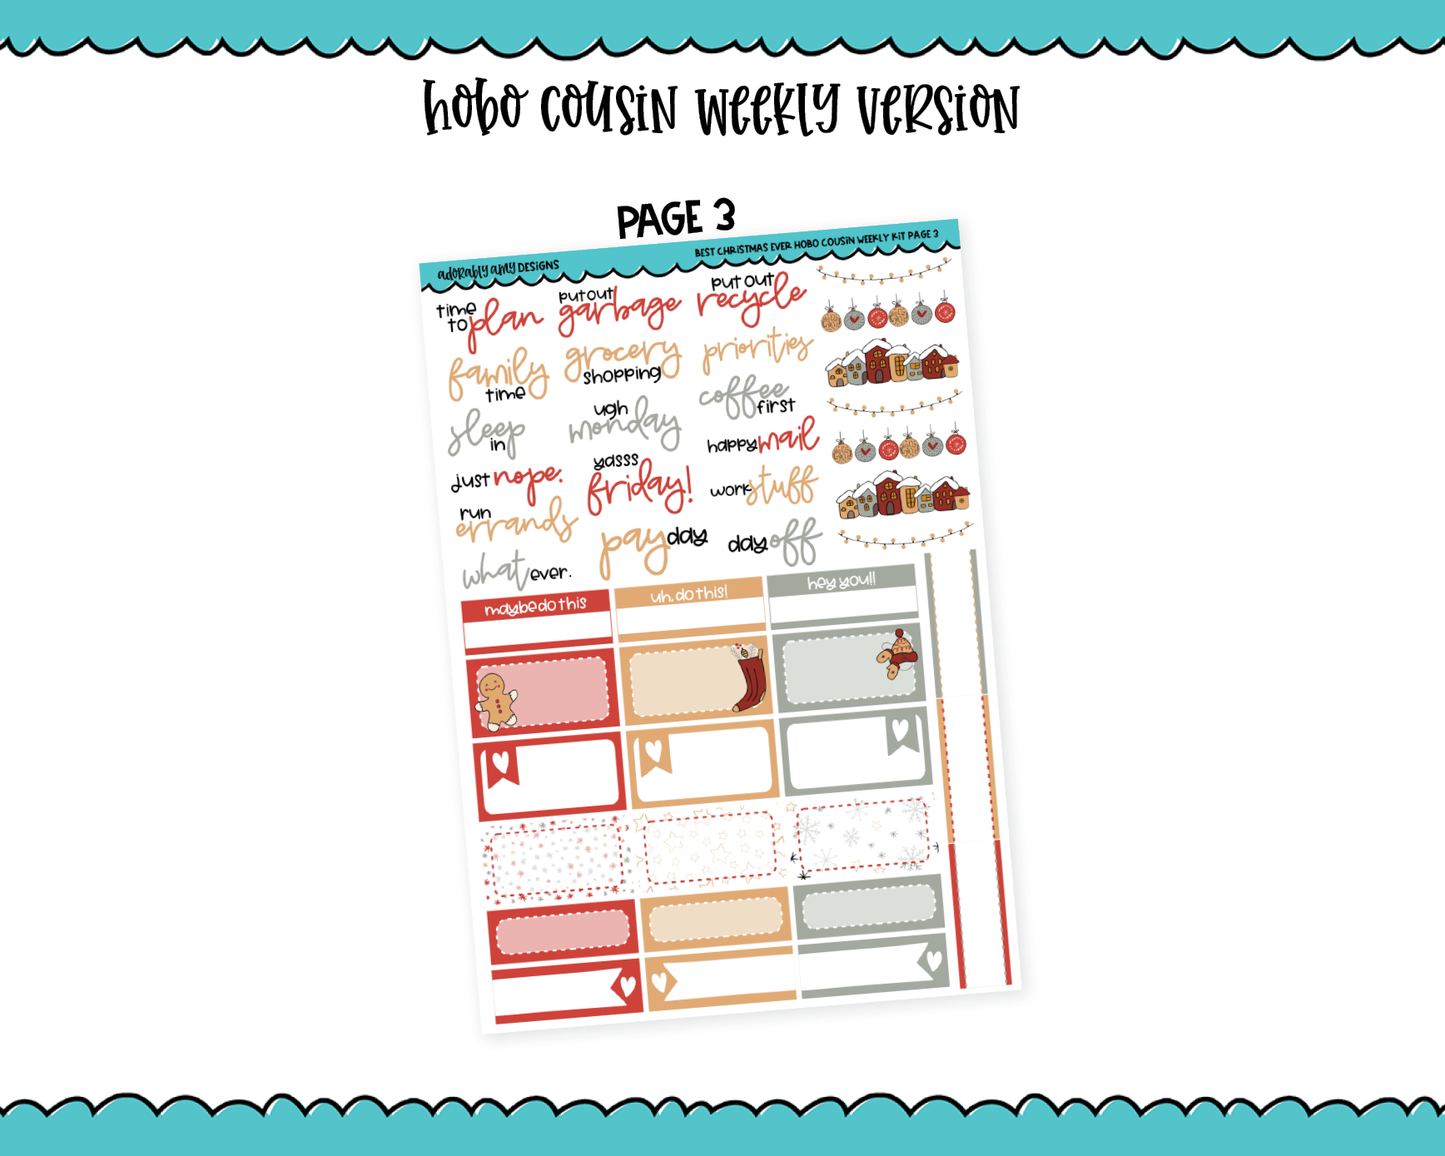 Hobonichi Cousin Weekly Best Christmas Ever Holiday Themed Planner Sticker Kit for Hobo Cousin or Similar Planners